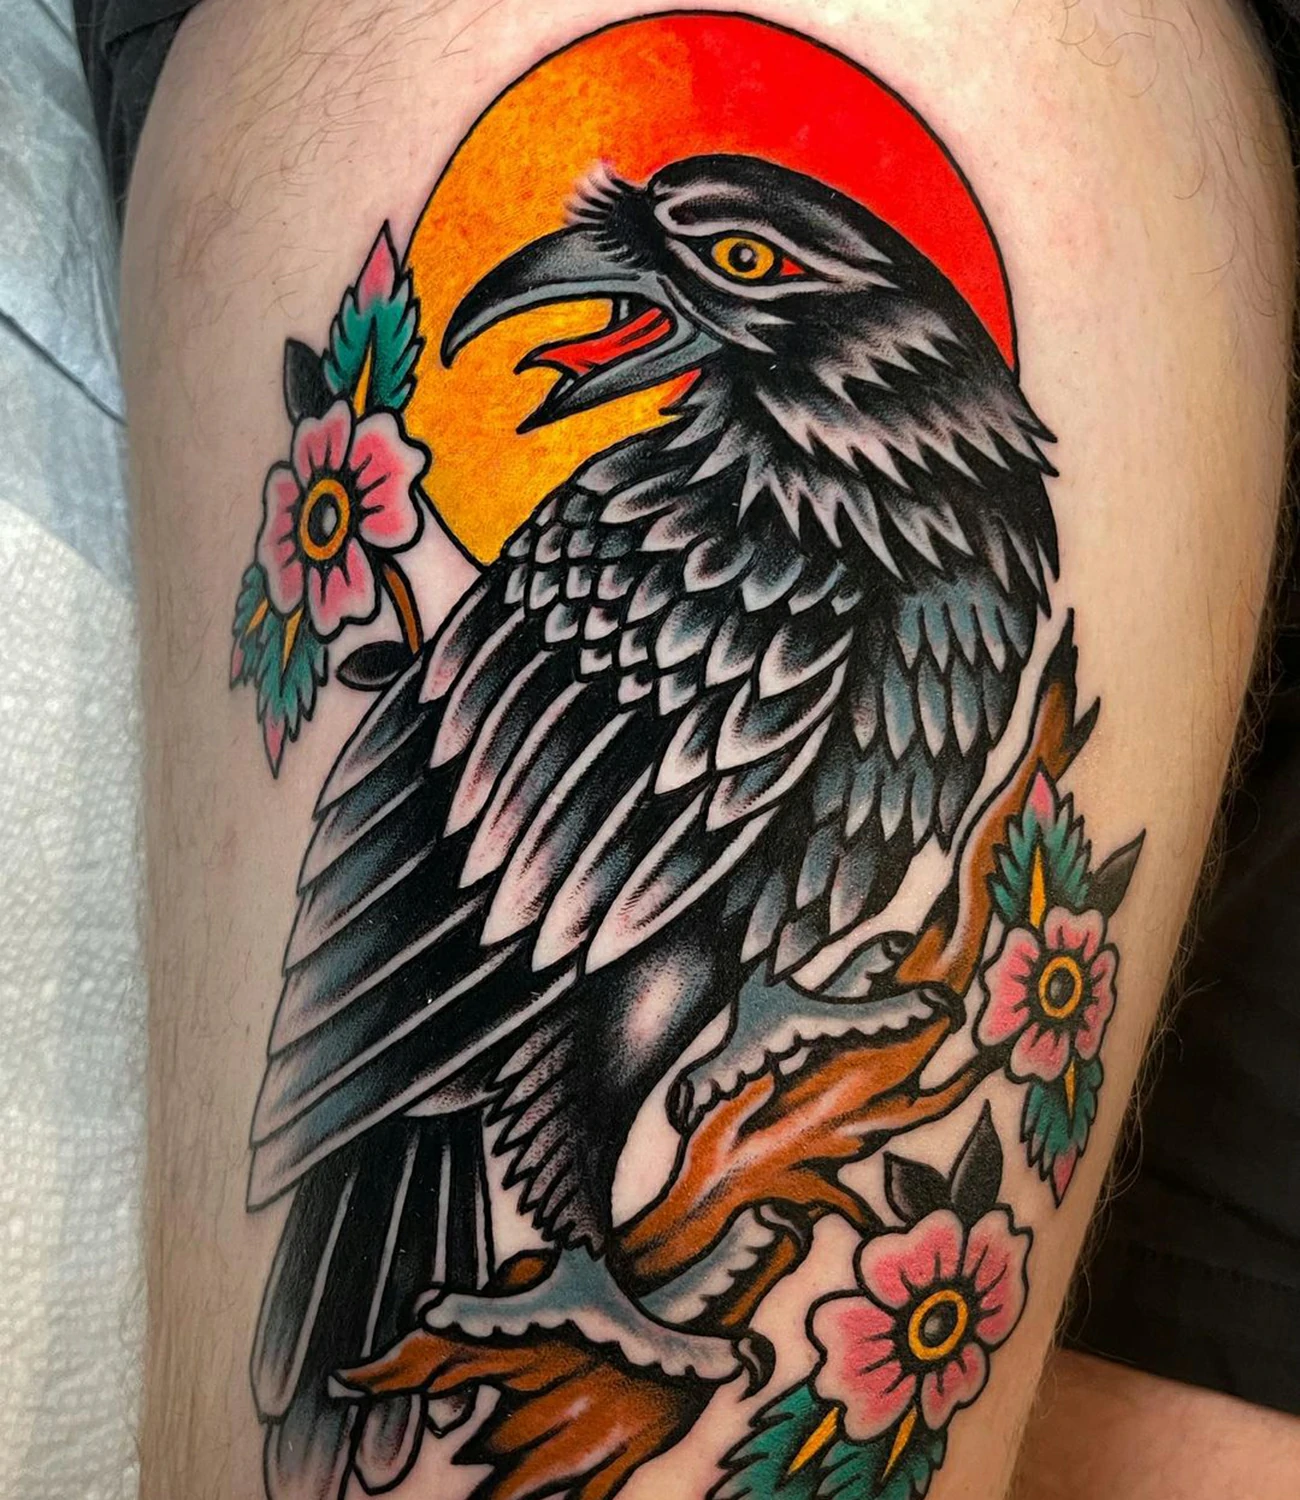 Raven traditional tattoo: A raven tattoo done in a traditional tattoo style.